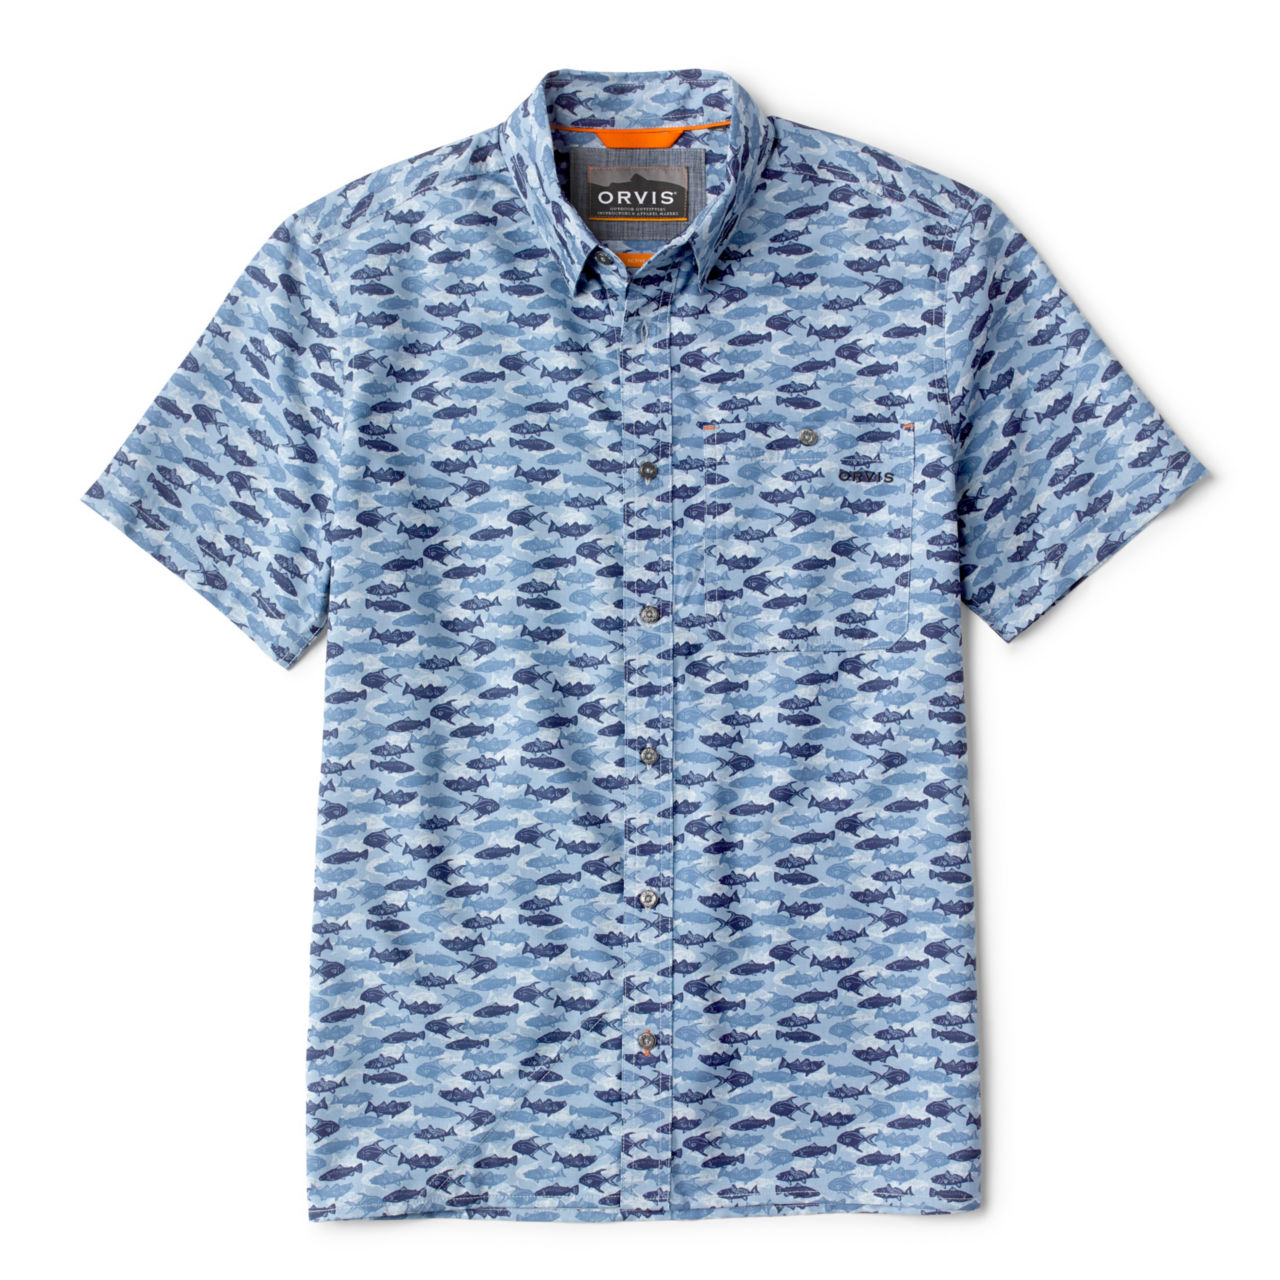 Printed Tech Chambray Short-Sleeved Shirt - DUSTY BLUE image number 0